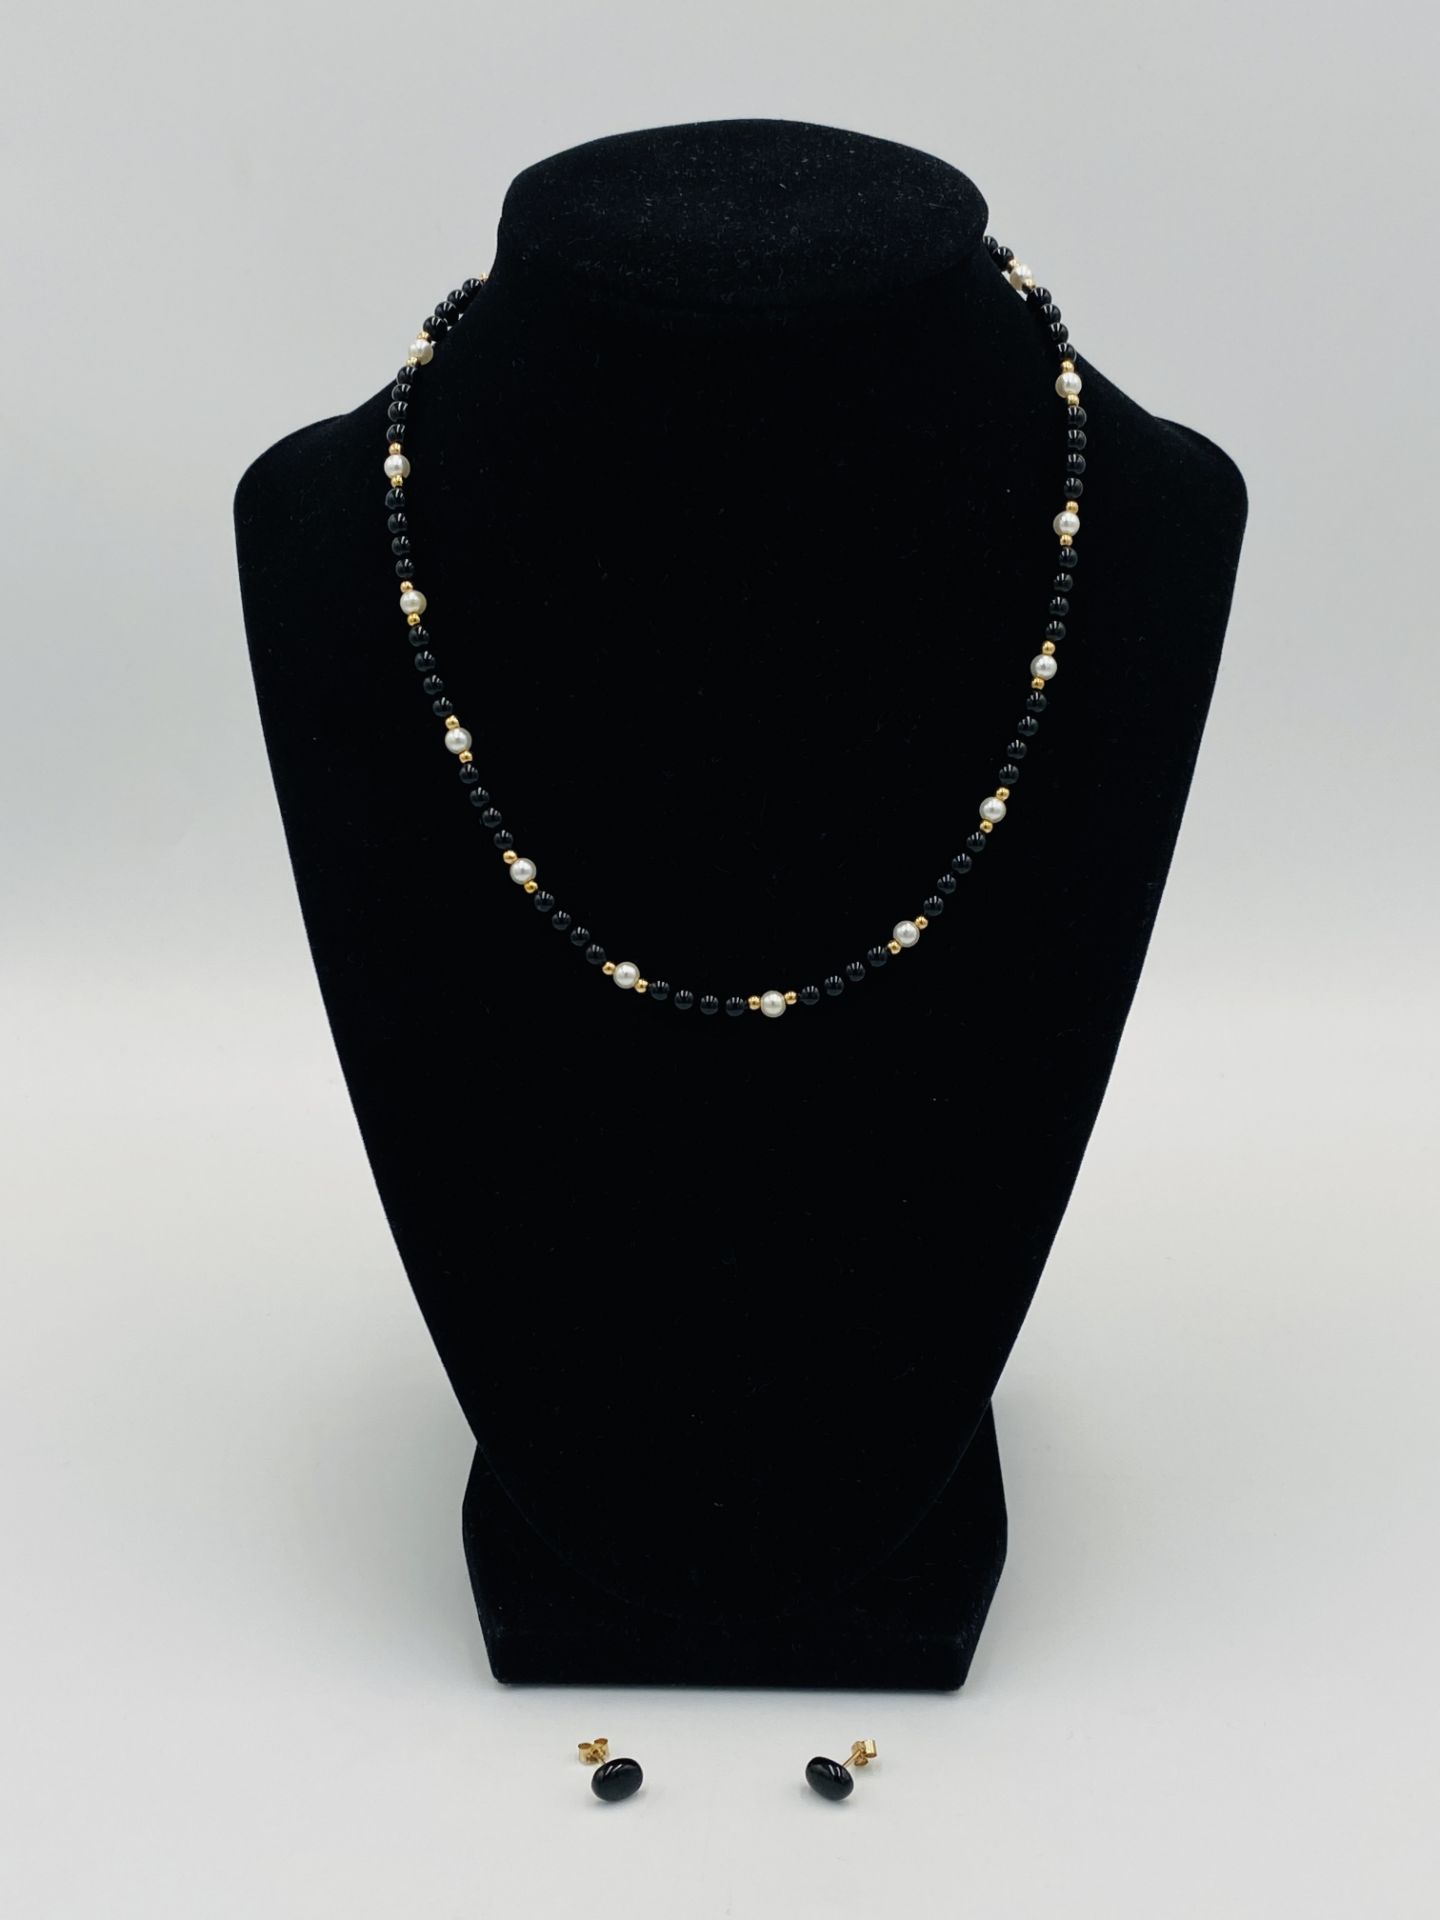 Bead necklace with 9ct gold clasp,together with matching earrings - Image 5 of 6